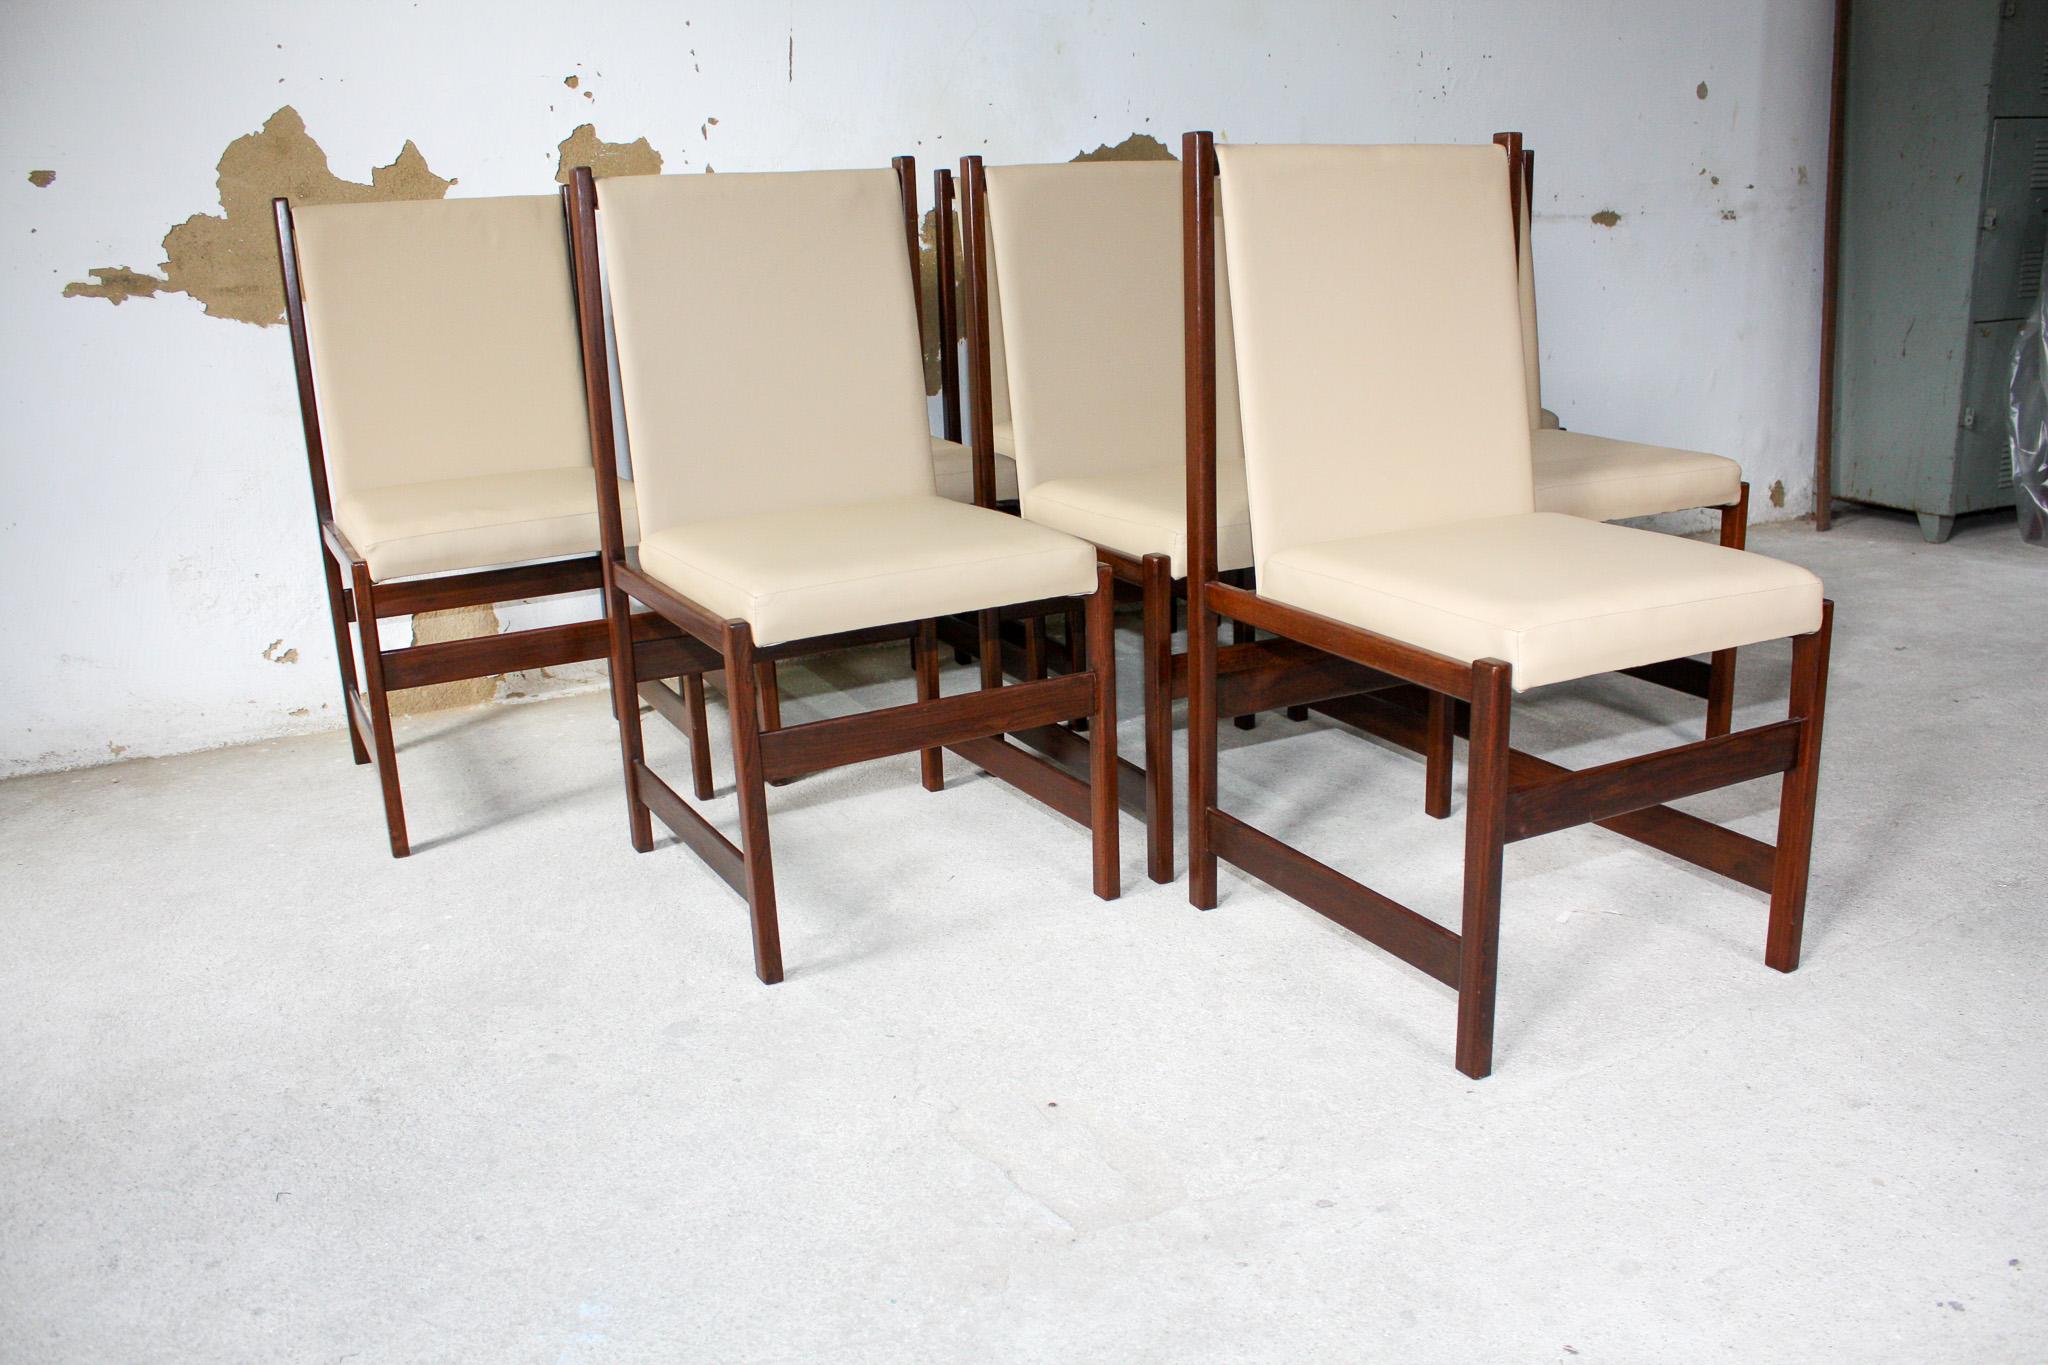 Brazilian Mid-Century Modern 8 Dining Chair Set in Hardwood&Beige Leather by Celina 1960s